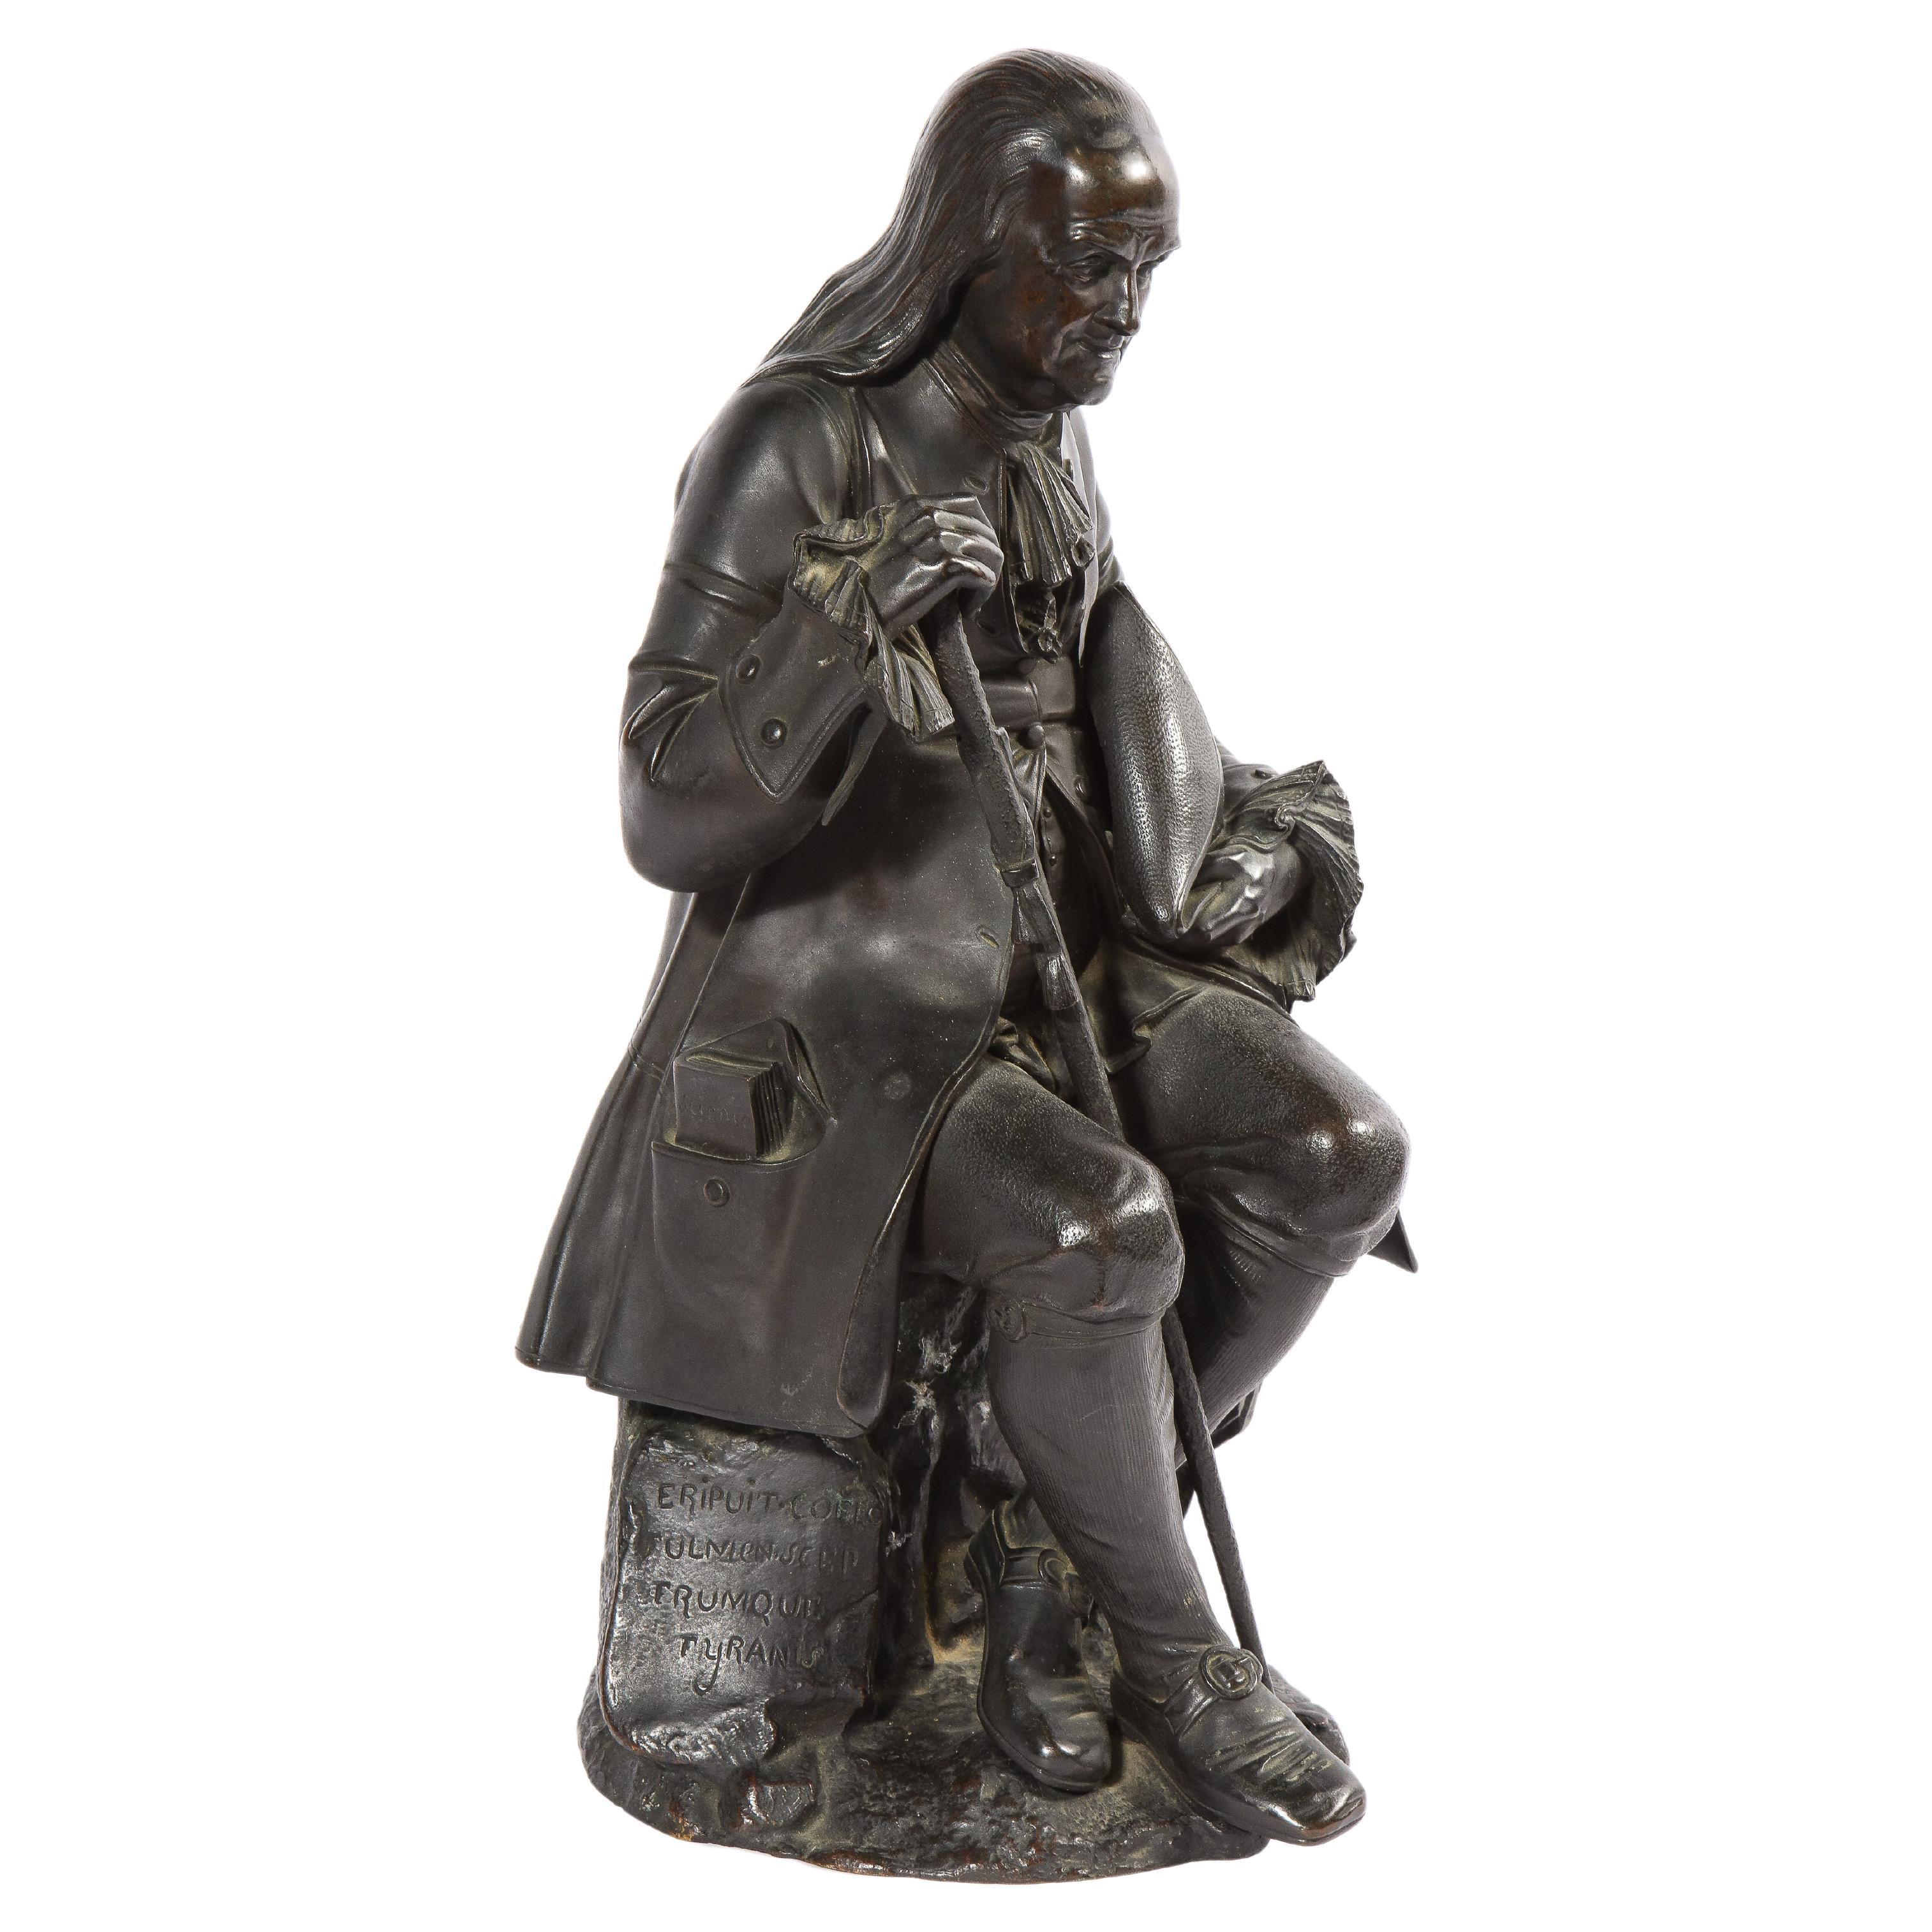 Albert-Ernest Carrier-Belleuse (France, 1824-1887)

A rare seated bronze statue of Benjamin Franklin holding his walking stick and hat, with a book in his right jacket pocket inscribed 